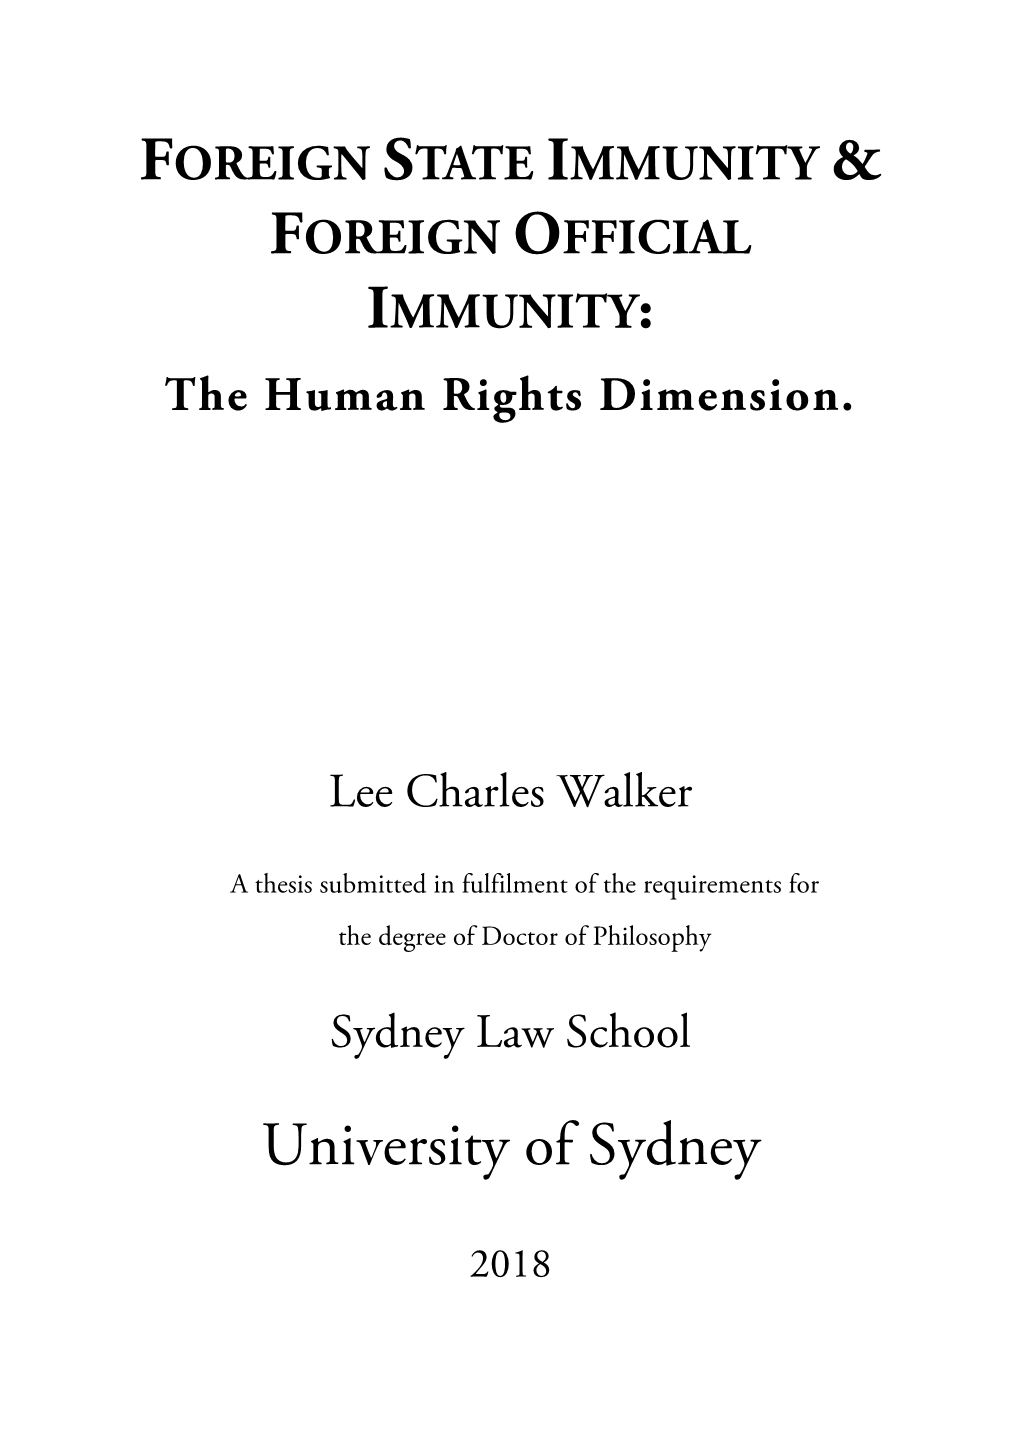 Foreign State and Foreign Official Immunity: the Human Rights